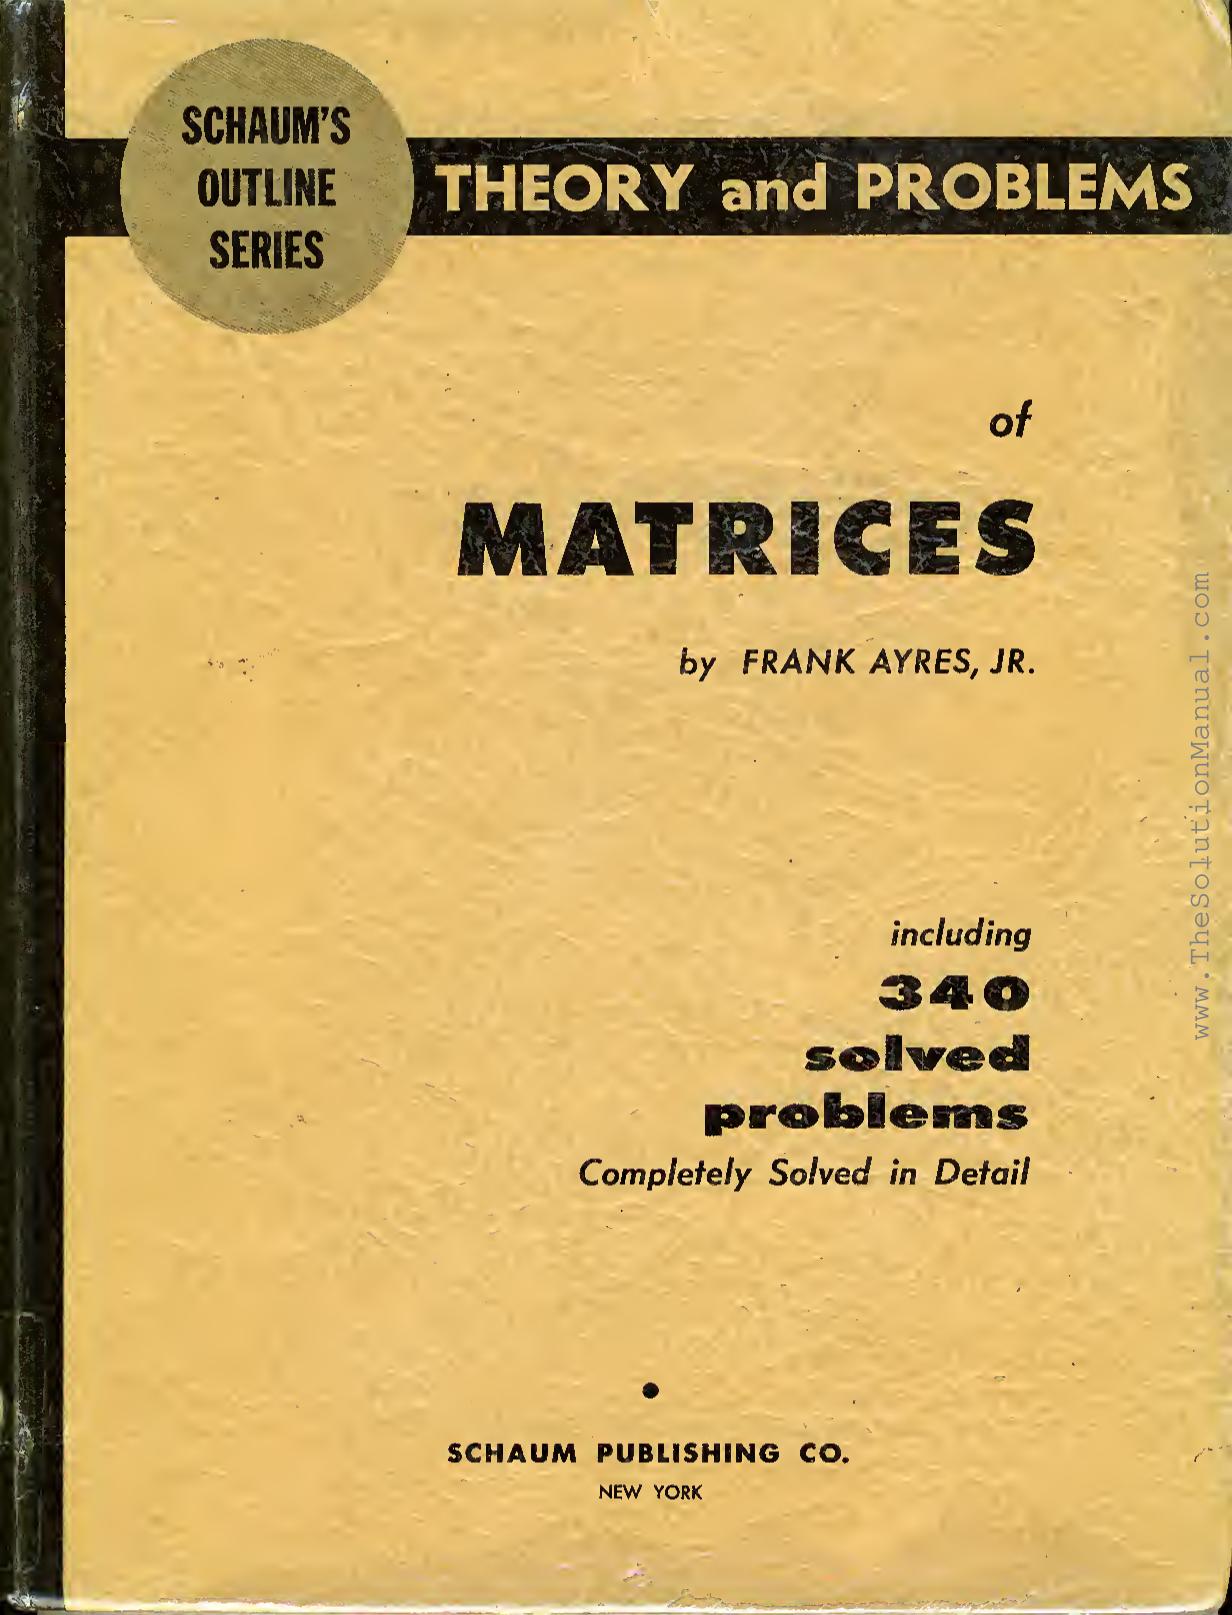 Schaum's Theory & Problems of Matrices